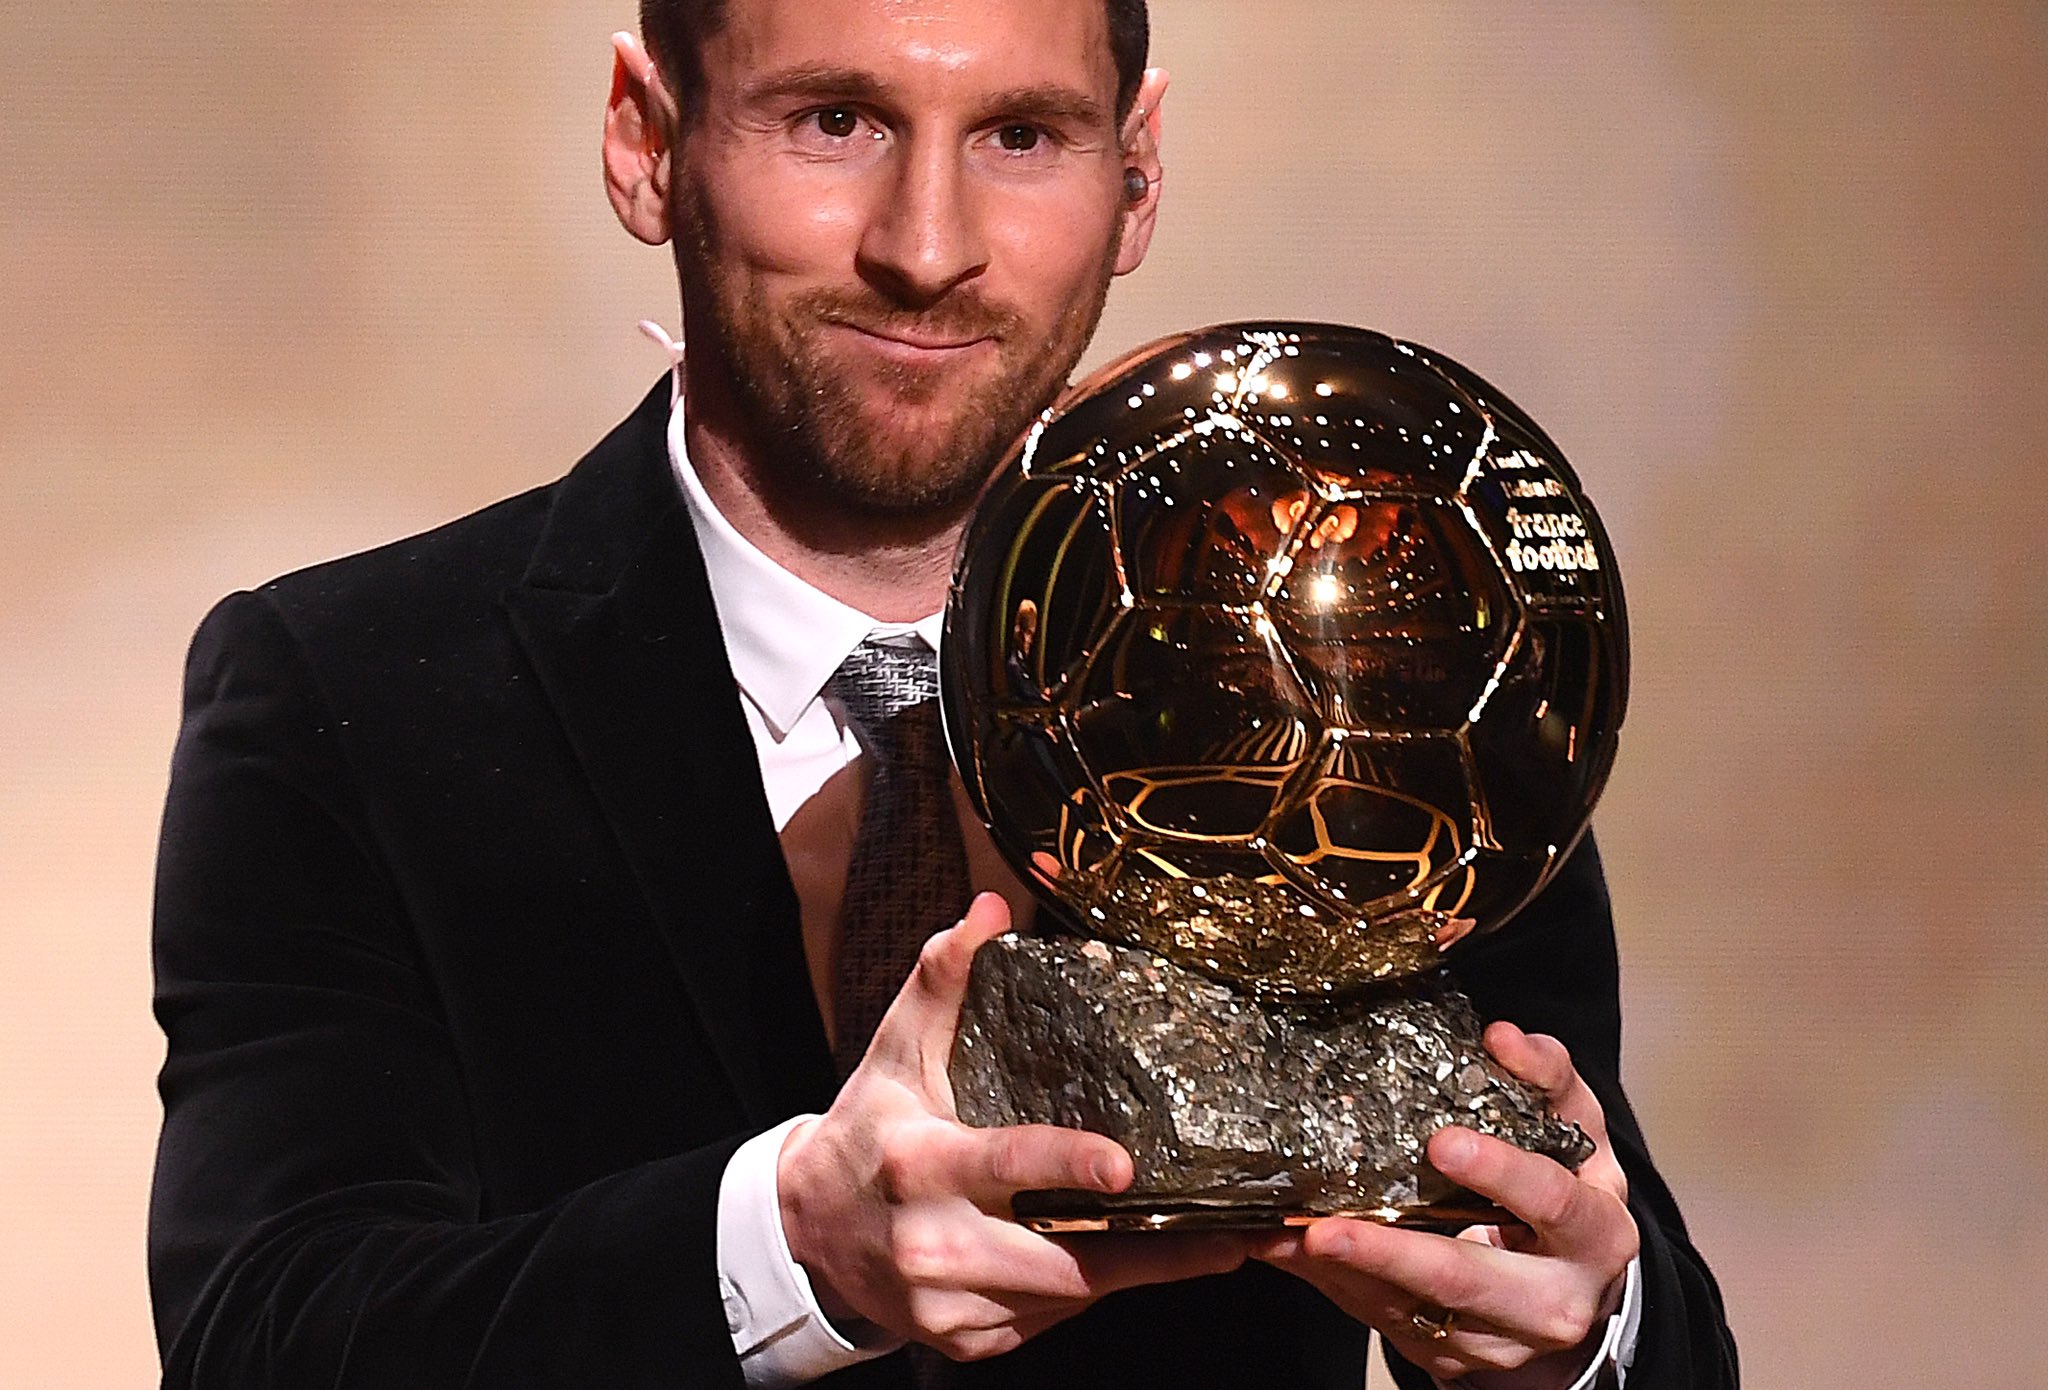 Lionel Messi holding the Ballon d'Or trophy